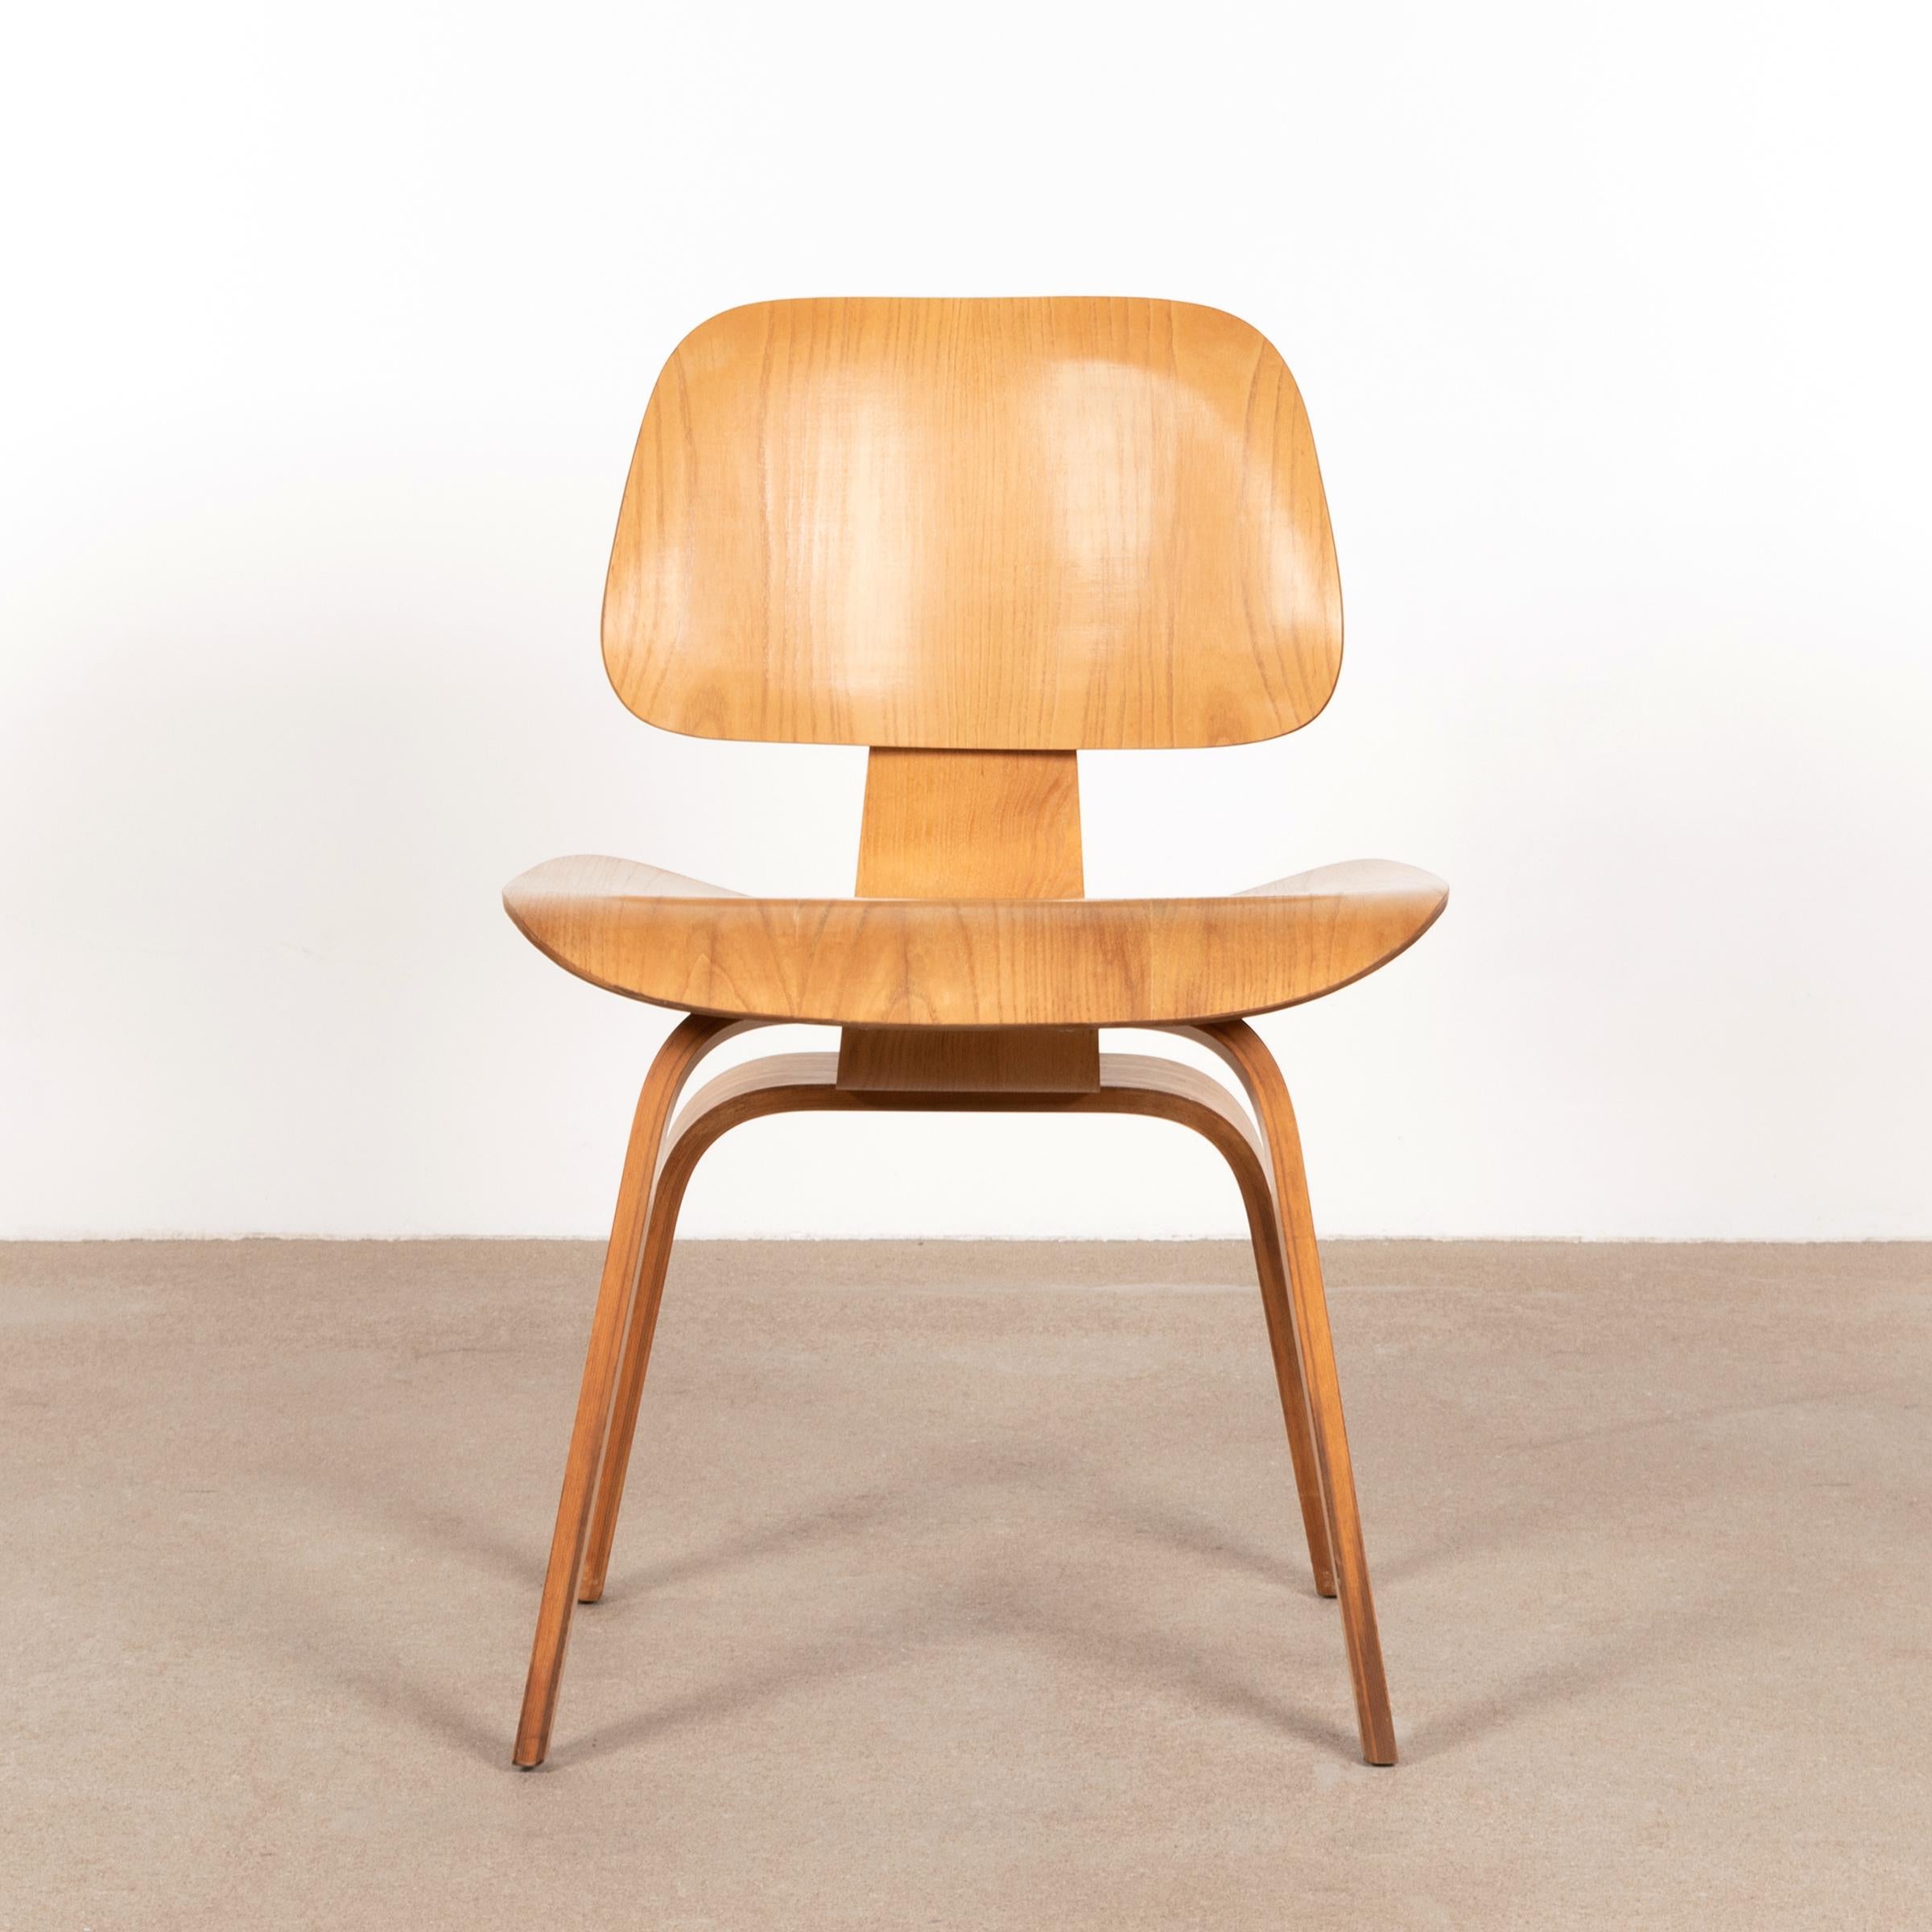 Iconic DCW dining chair in ash plywood. The ash veneer is in very good condition with nice patina. Early Herman Miller production from June 1953 (4-2-5 screw configuration), just after Herman Miller took over production from Evans Products Company,